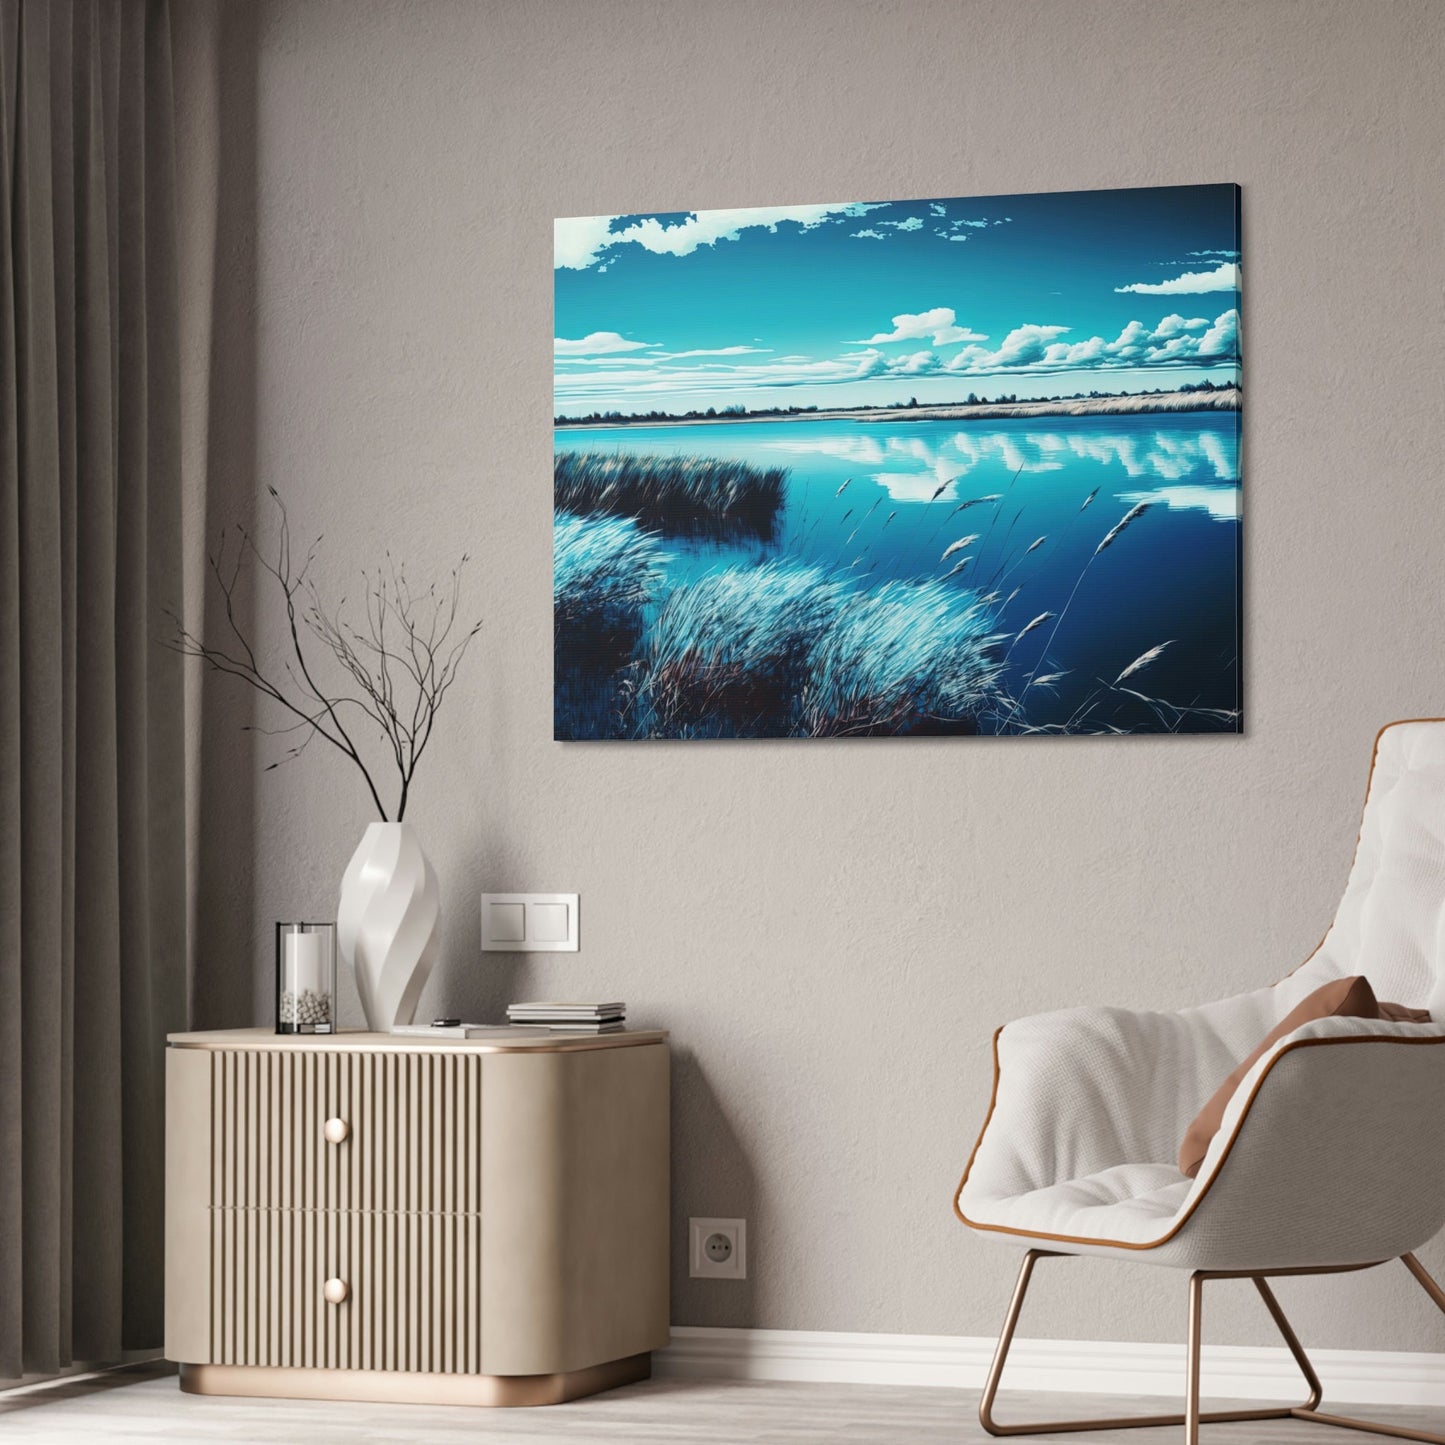 Lakeside Harmony: Print on Canvas with Tranquil Lake Scenery